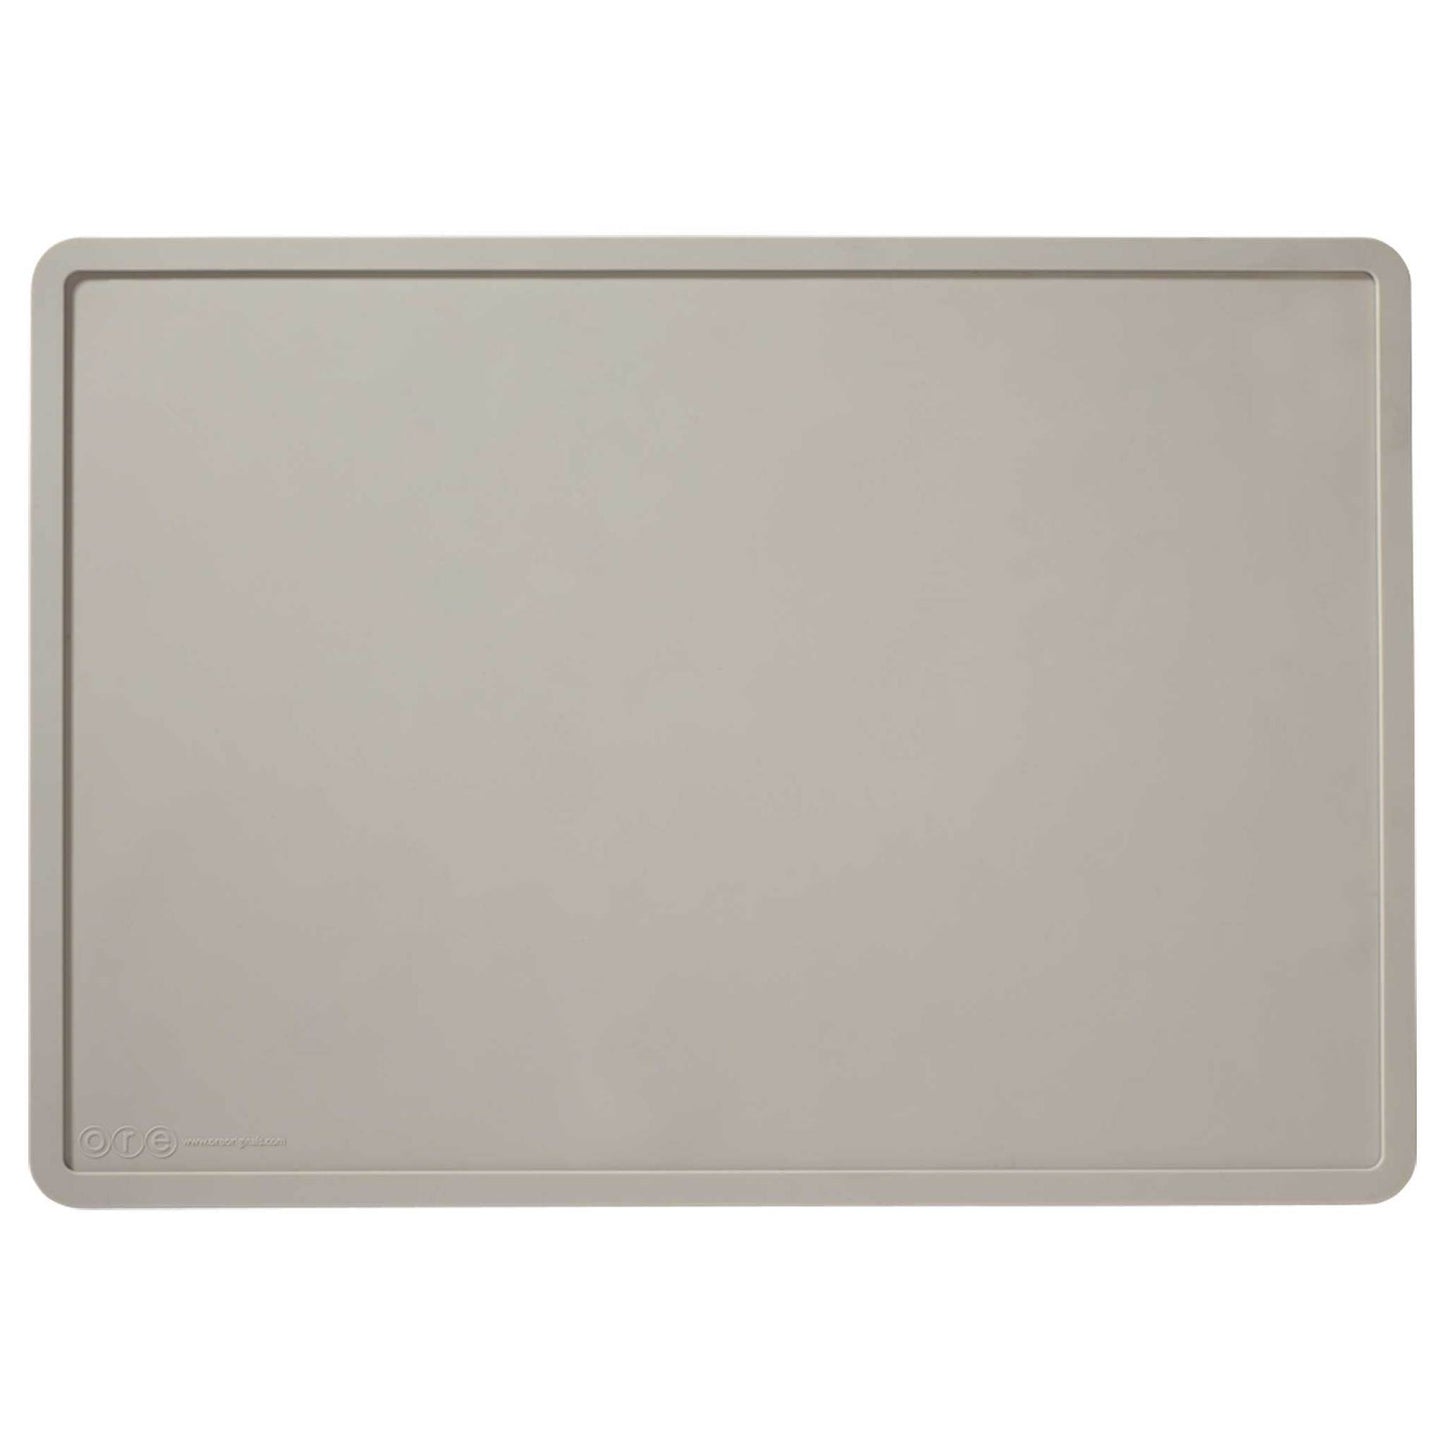 Silicone Placemats Light Grey Image